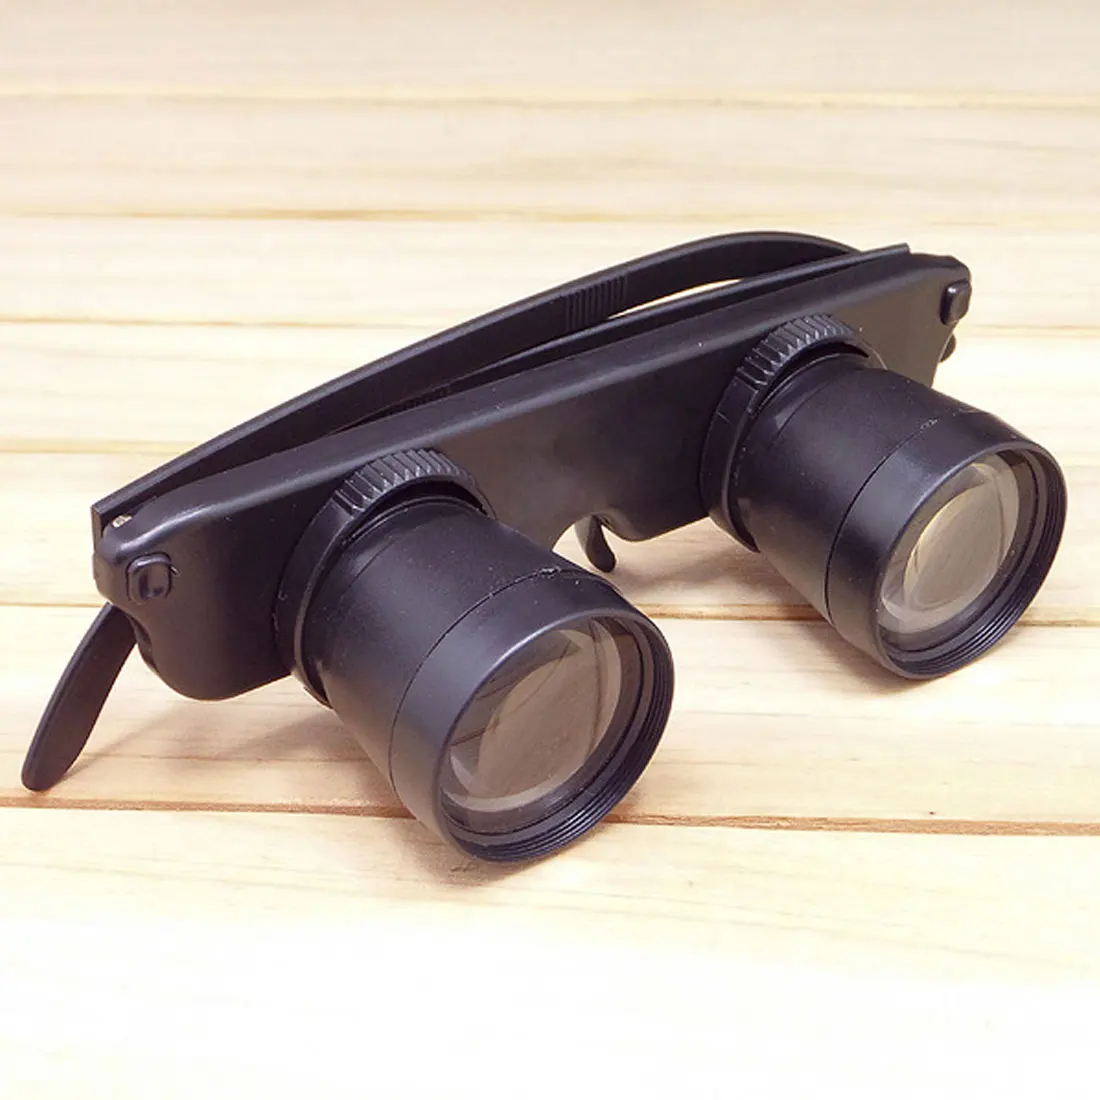 

NEW 3x28 Magnifier Glasses Style Outdoor Fishing Optics Binoculars Telescope Magnifying Glass Big Vision Loupe 50m/200m